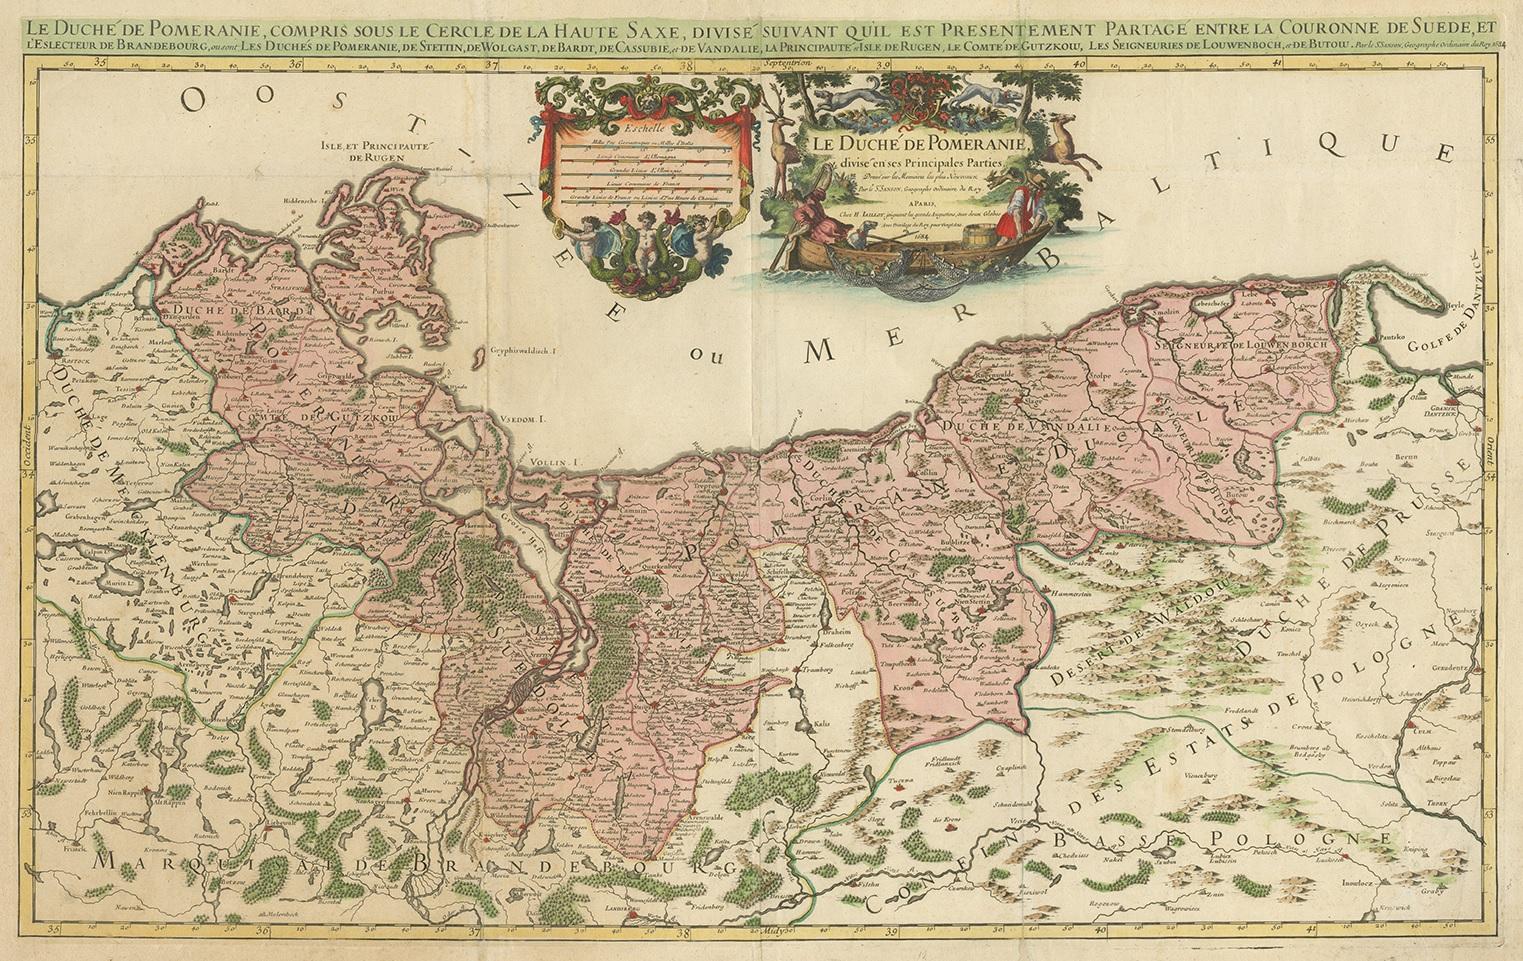 Antique map titled 'Le Duche de Pomeranie divise en ses Principales Parties (..)'. Large map of Pomerania. Pomerania is a historical region on the southern shore of the Baltic Sea in Central Europe, split between Poland and Germany. This map exists